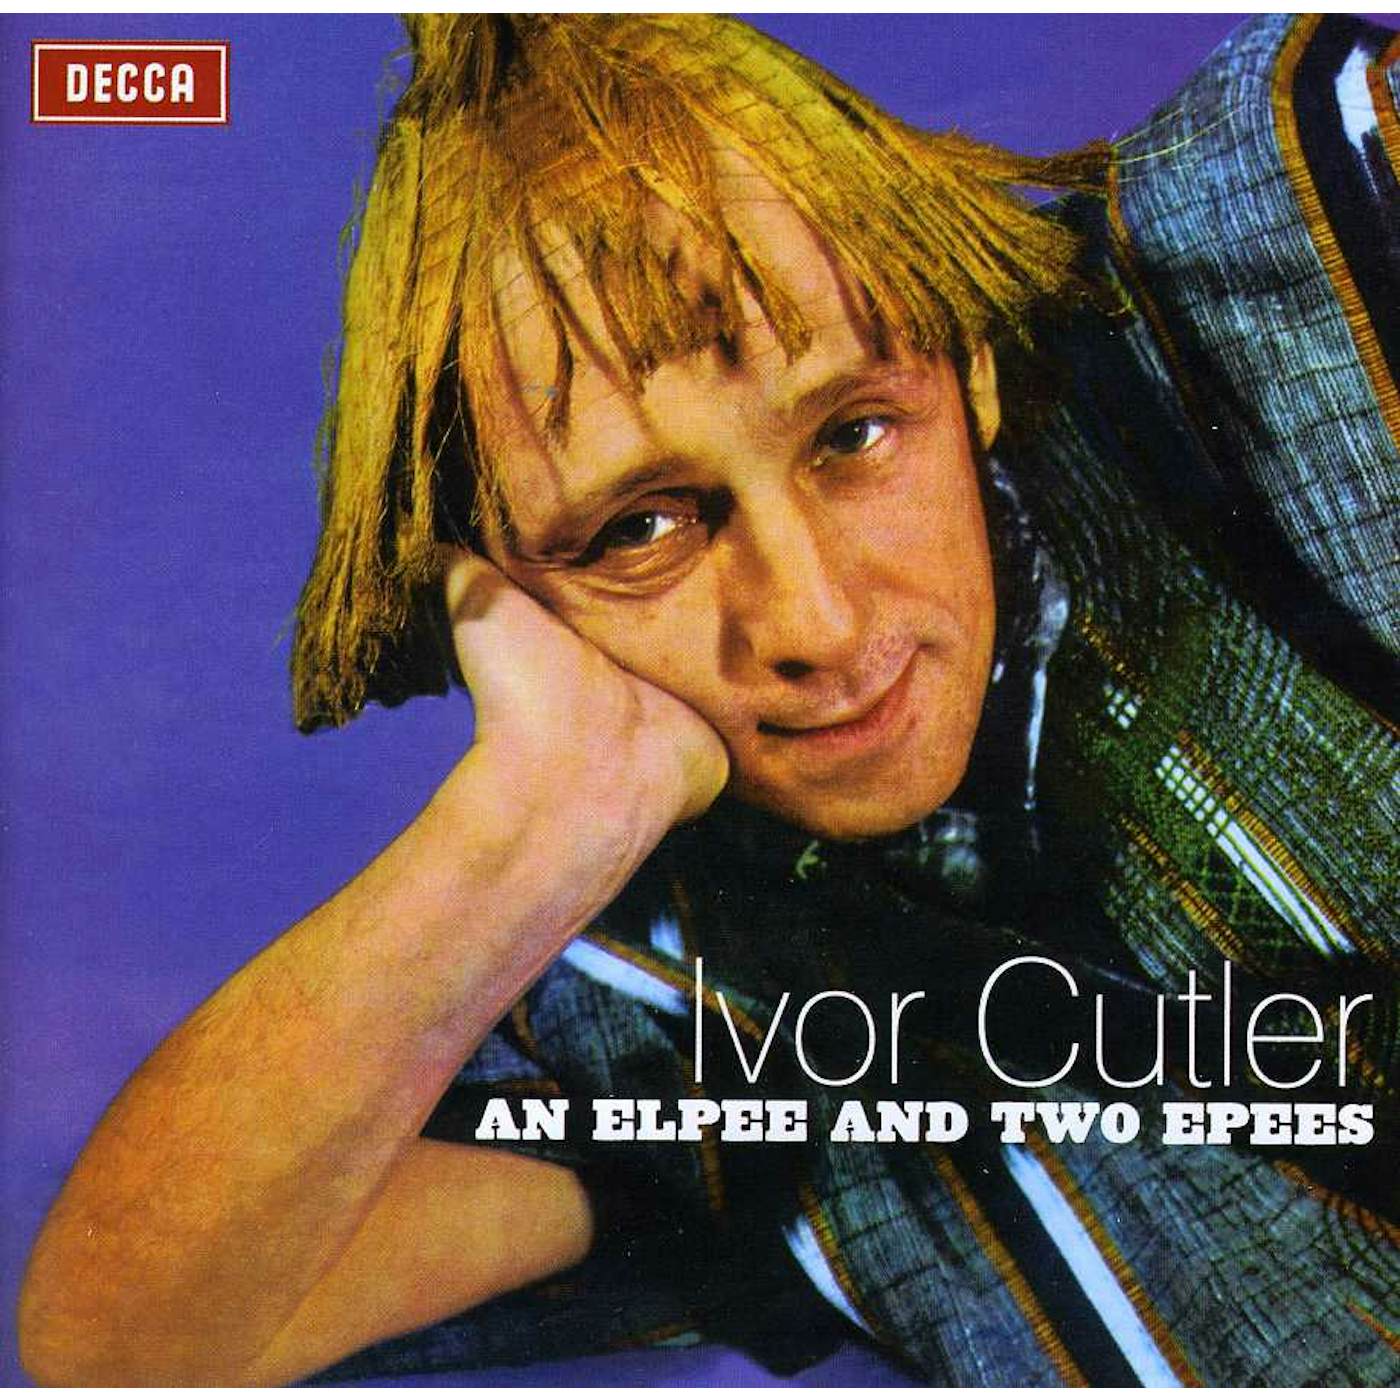 Ivor Cutler ELPEE & TWO EPEES CD